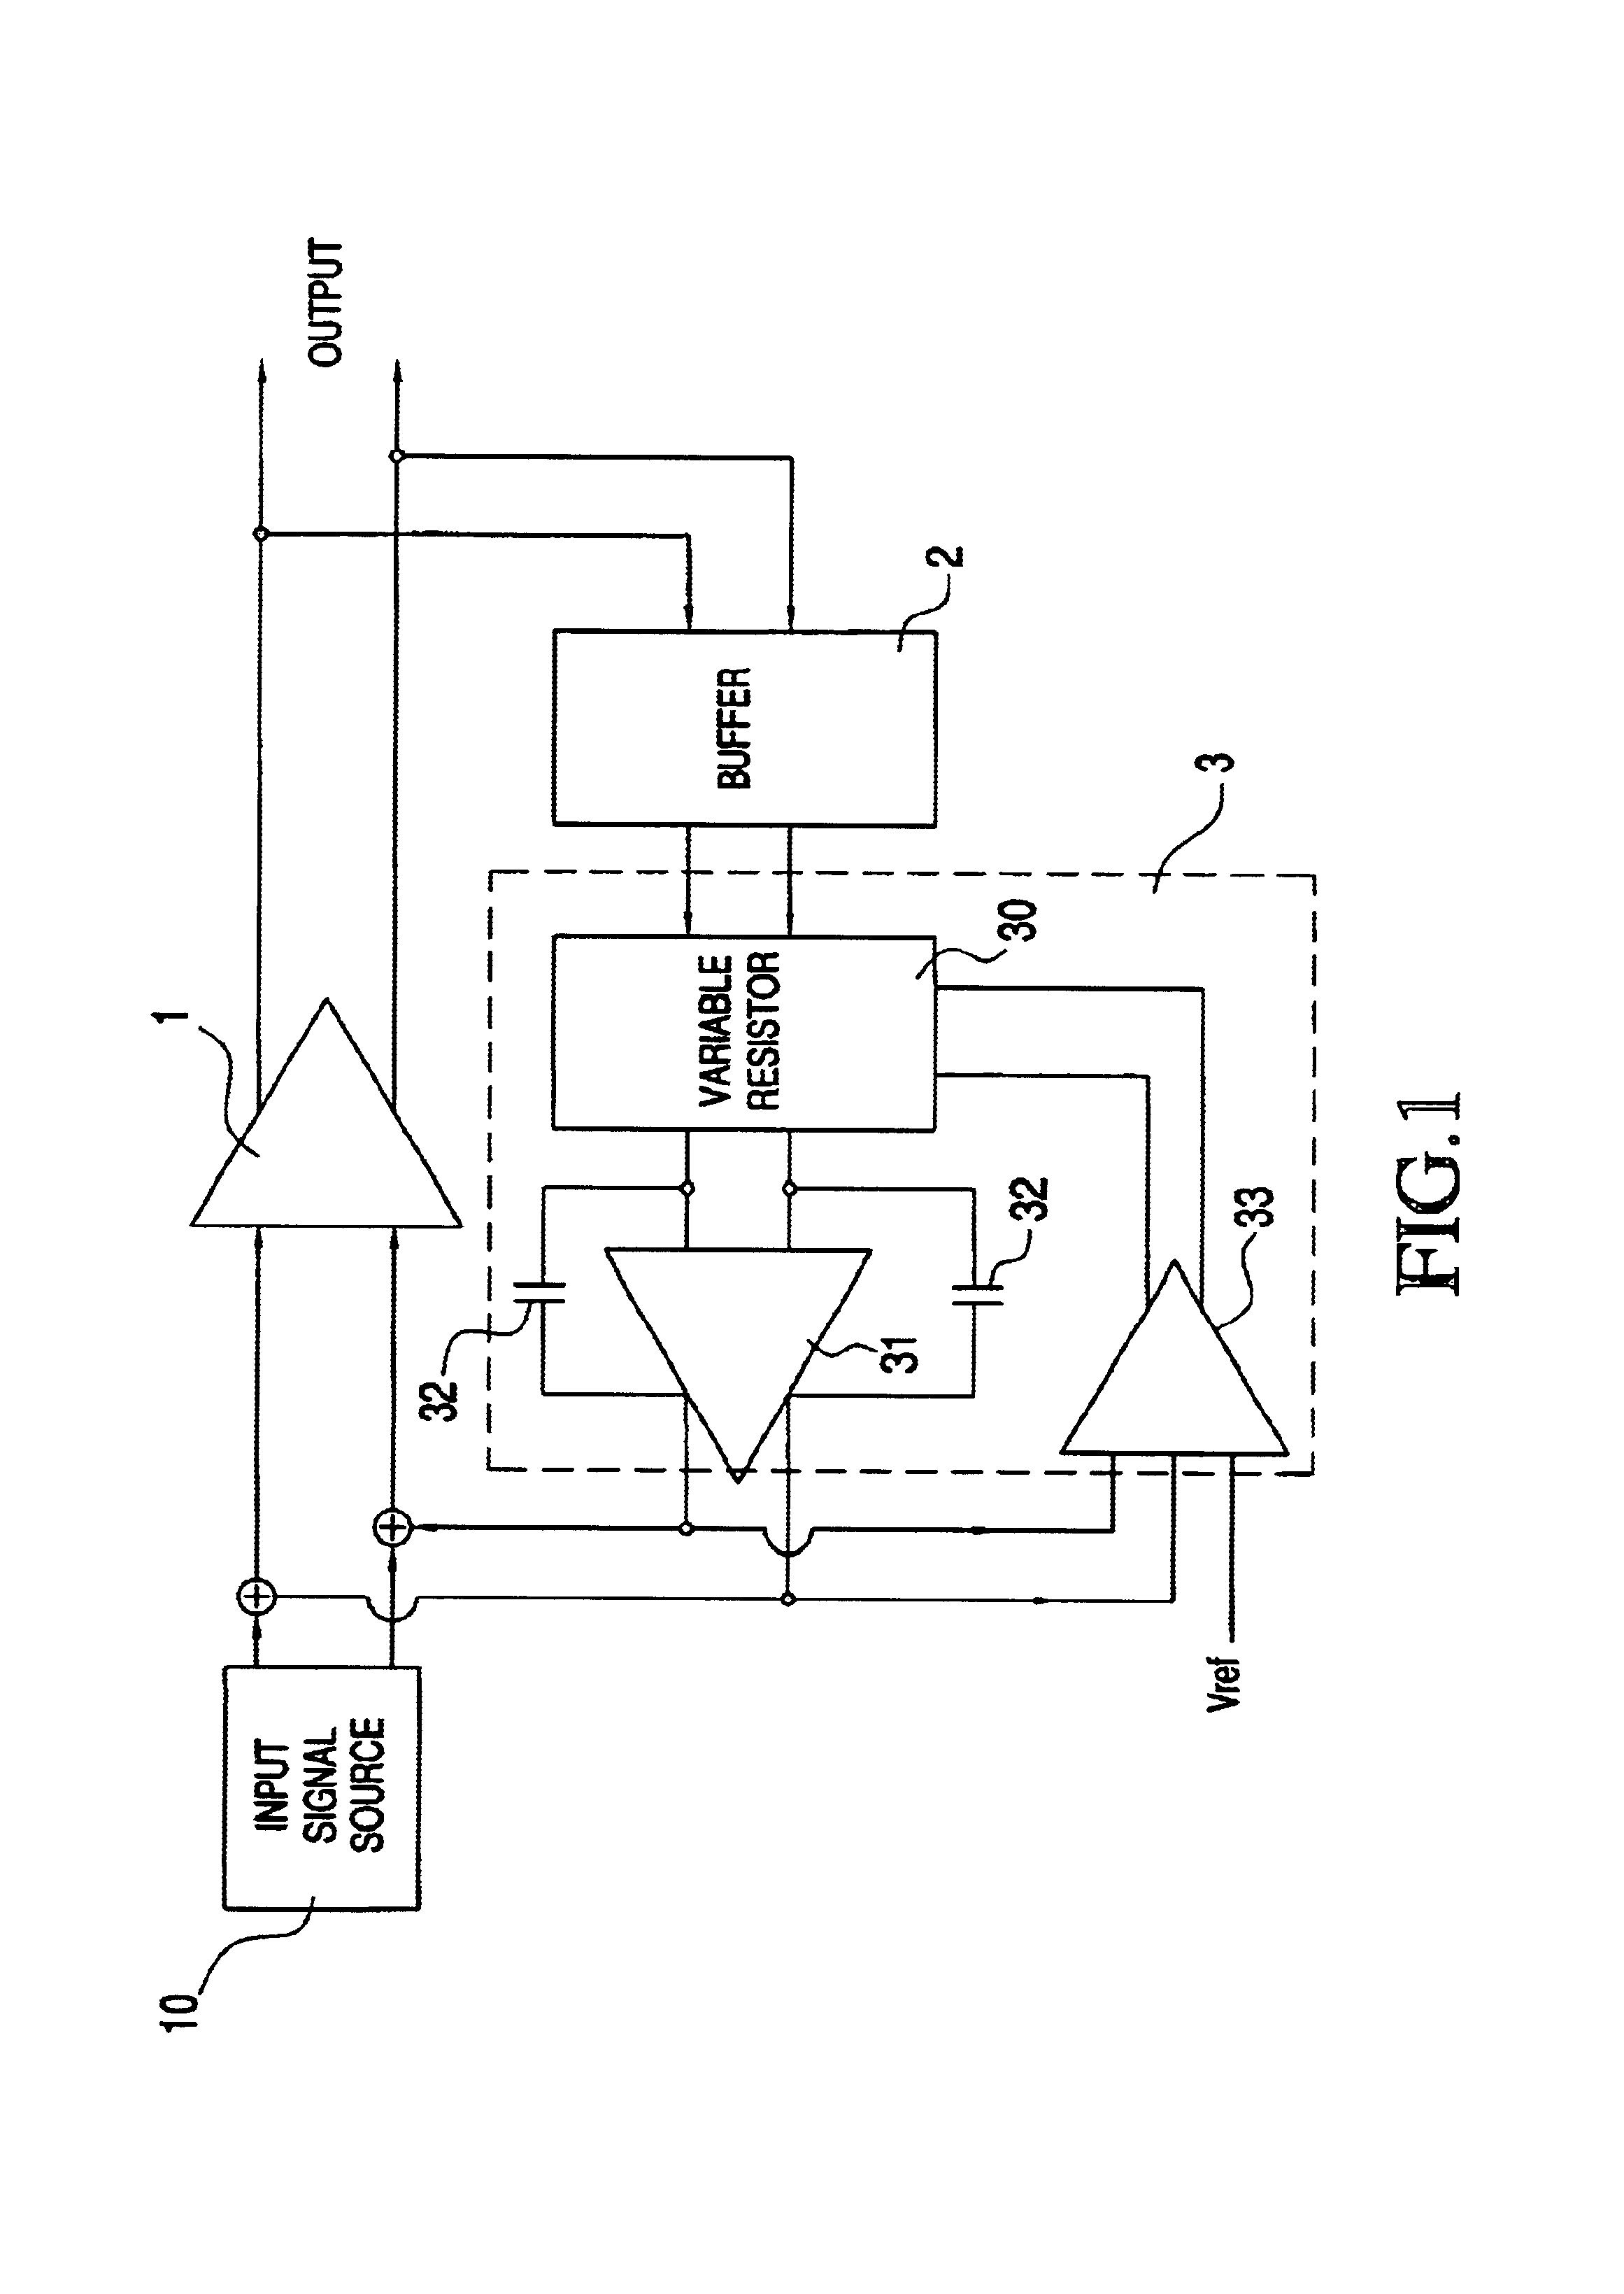 Gain amplifier with DC offset cancellation circuit